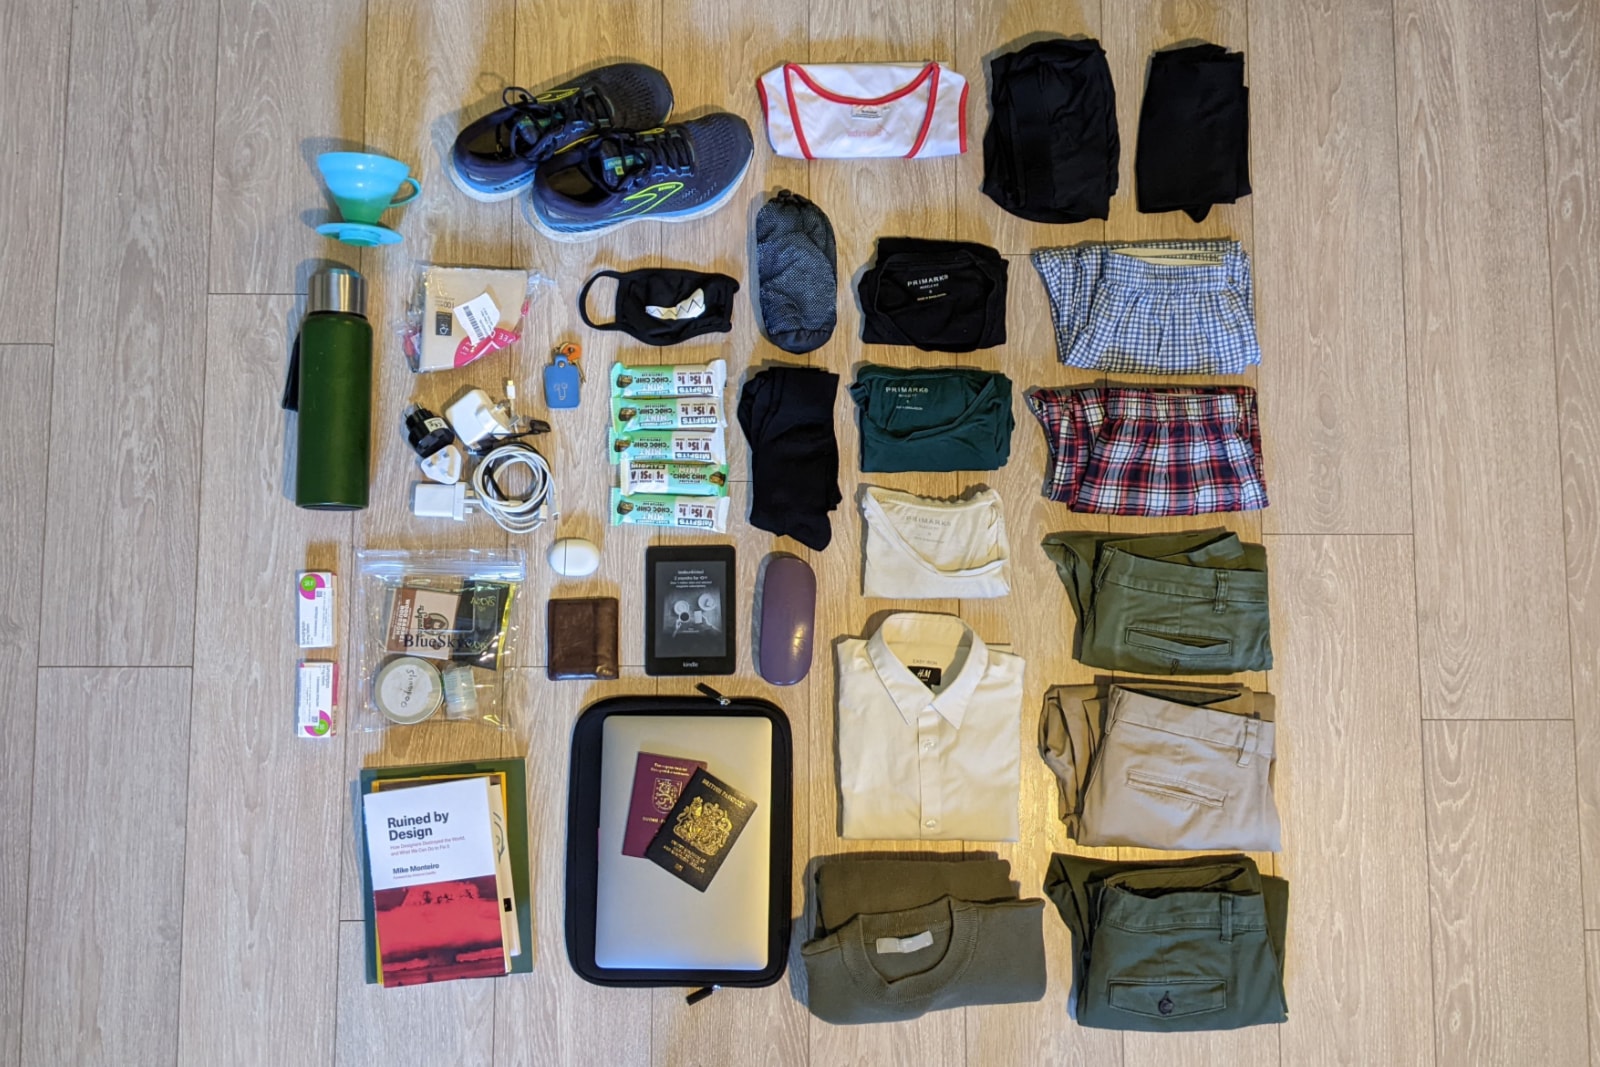 Every item I bring with me when I travel, neatly placed next to each other on the floor.